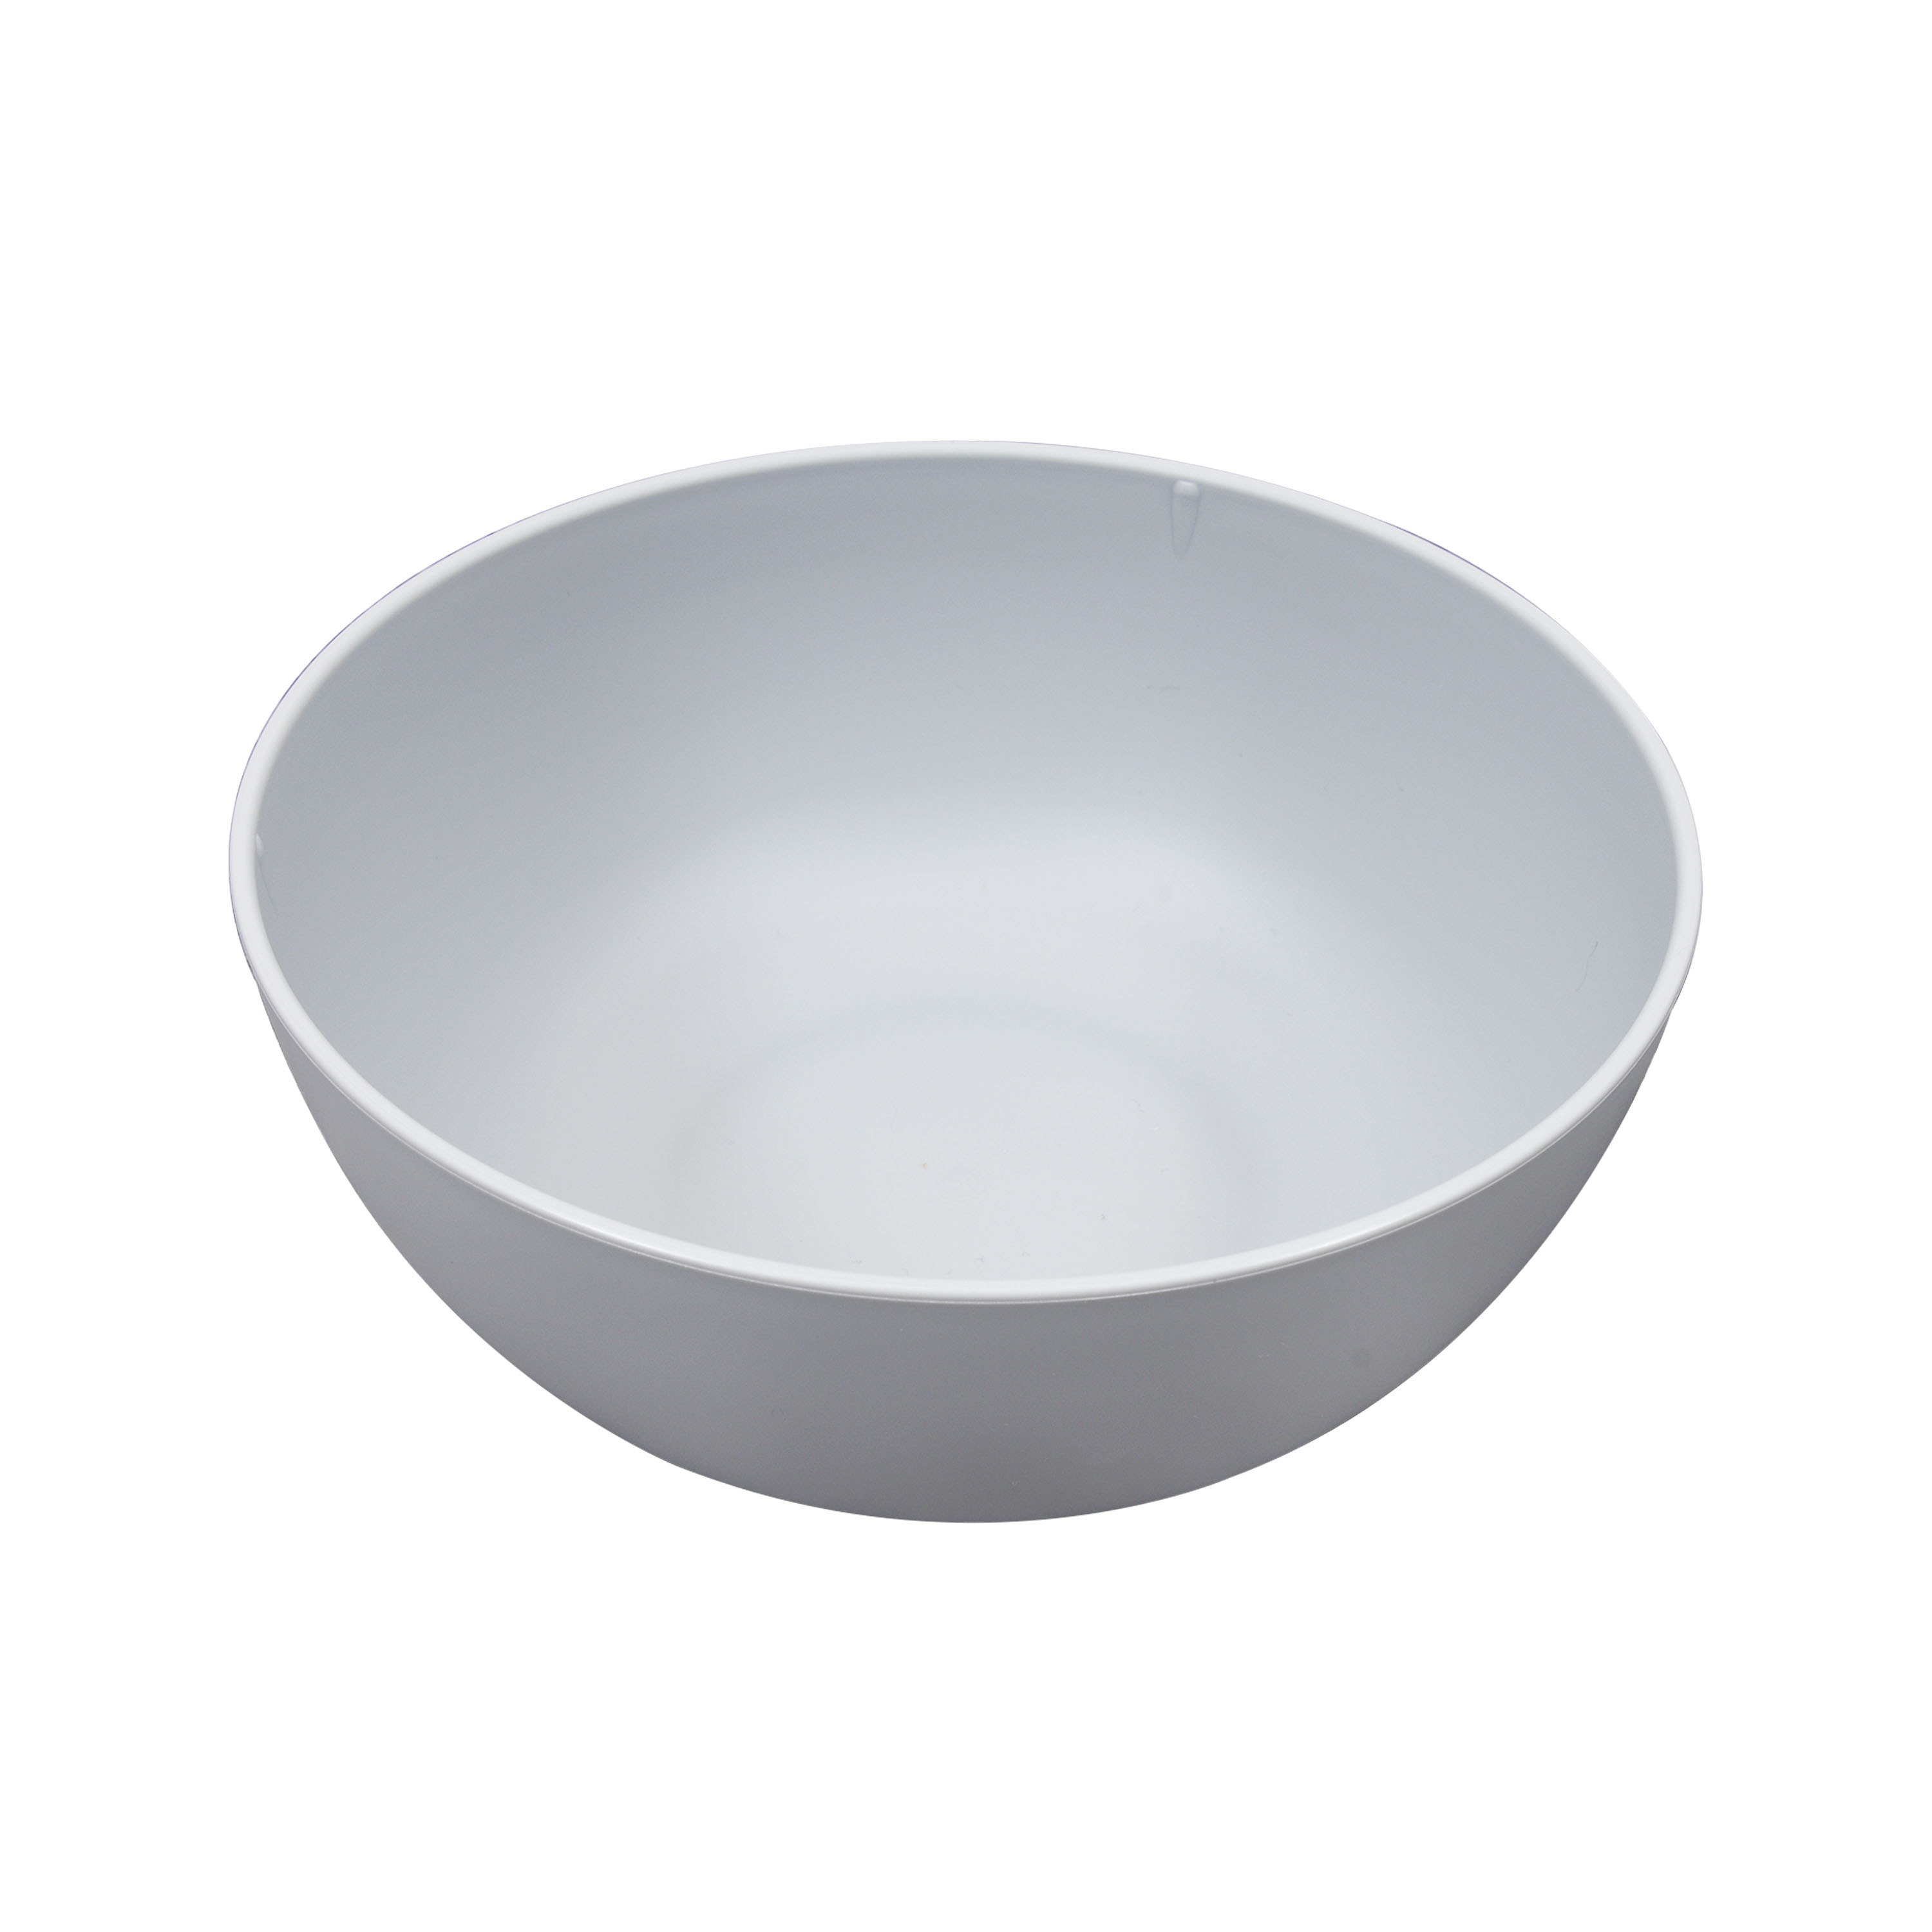 Mainstays - Gray Round Plastic Cereal Bowl, 38-Ounce - image 3 of 4